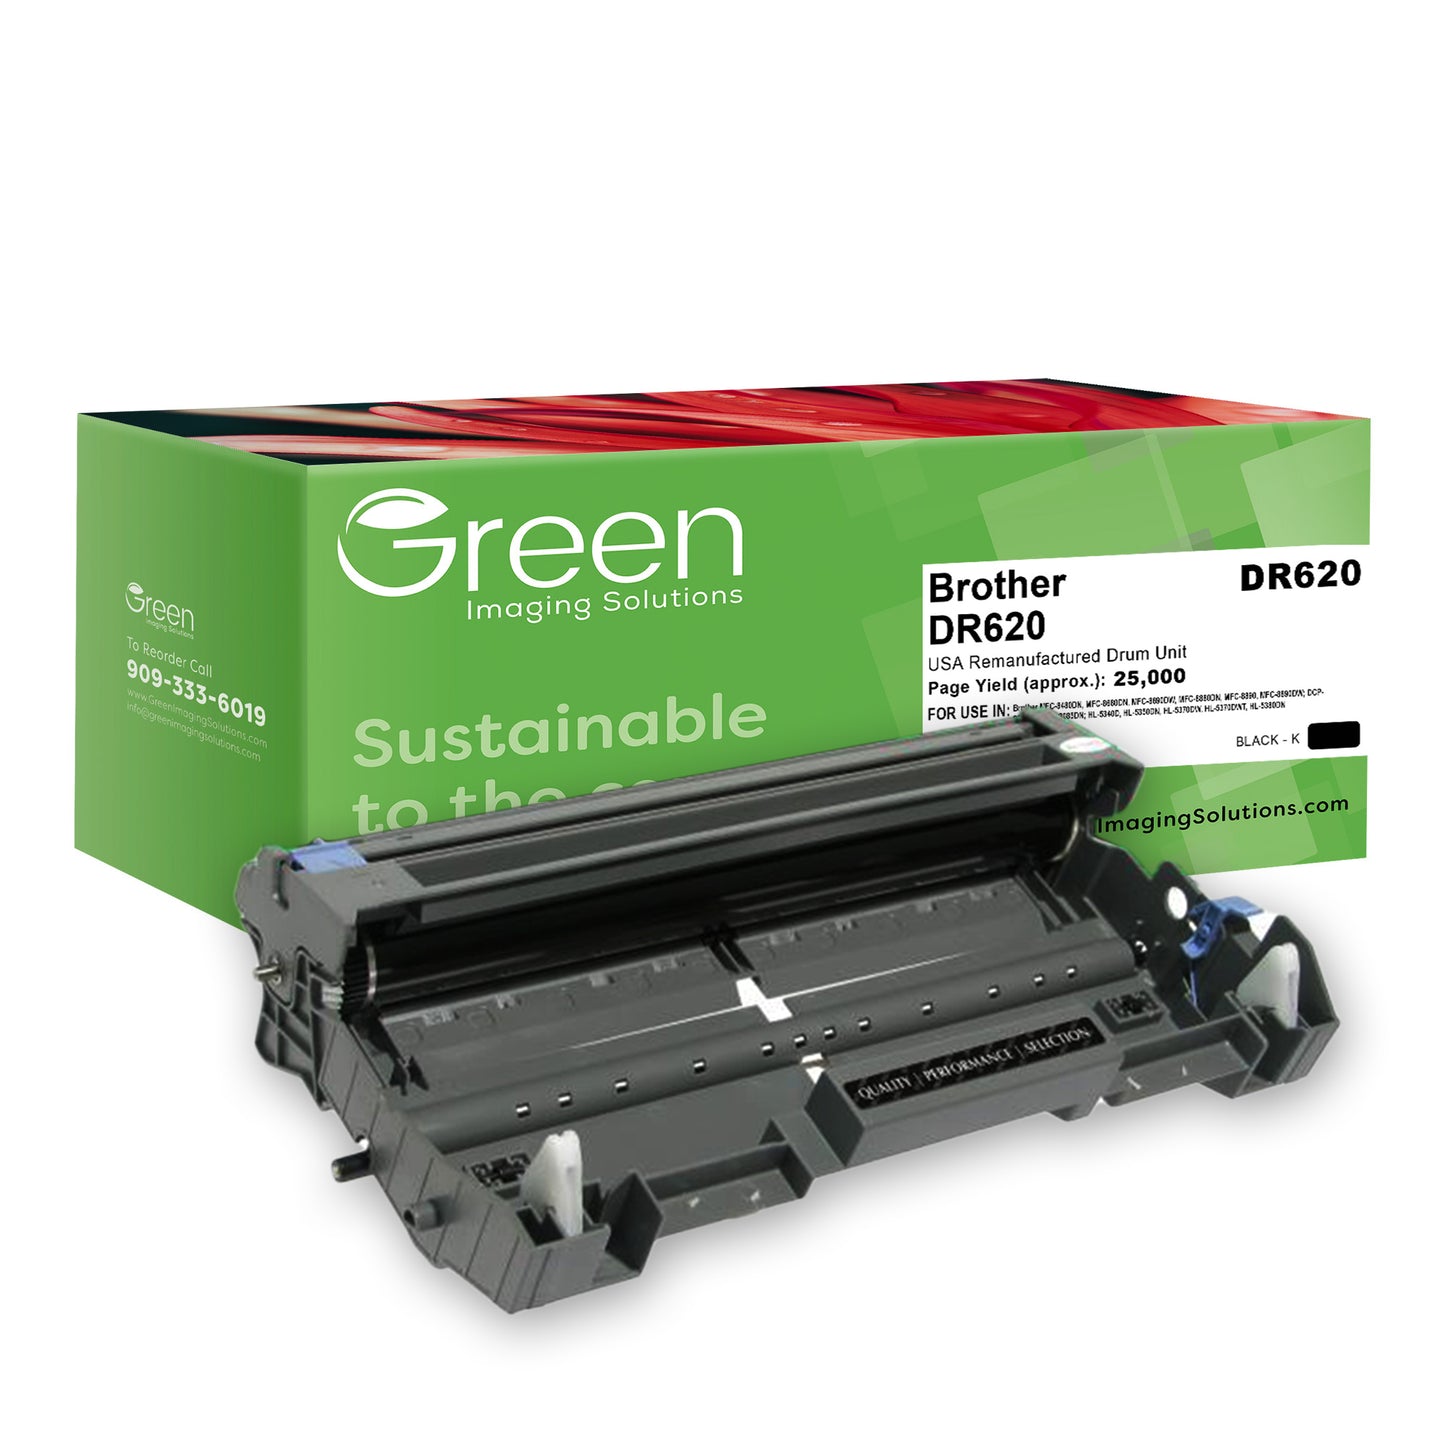 Green Imaging Solutions USA Remanufactured Drum Unit for Brother DR620